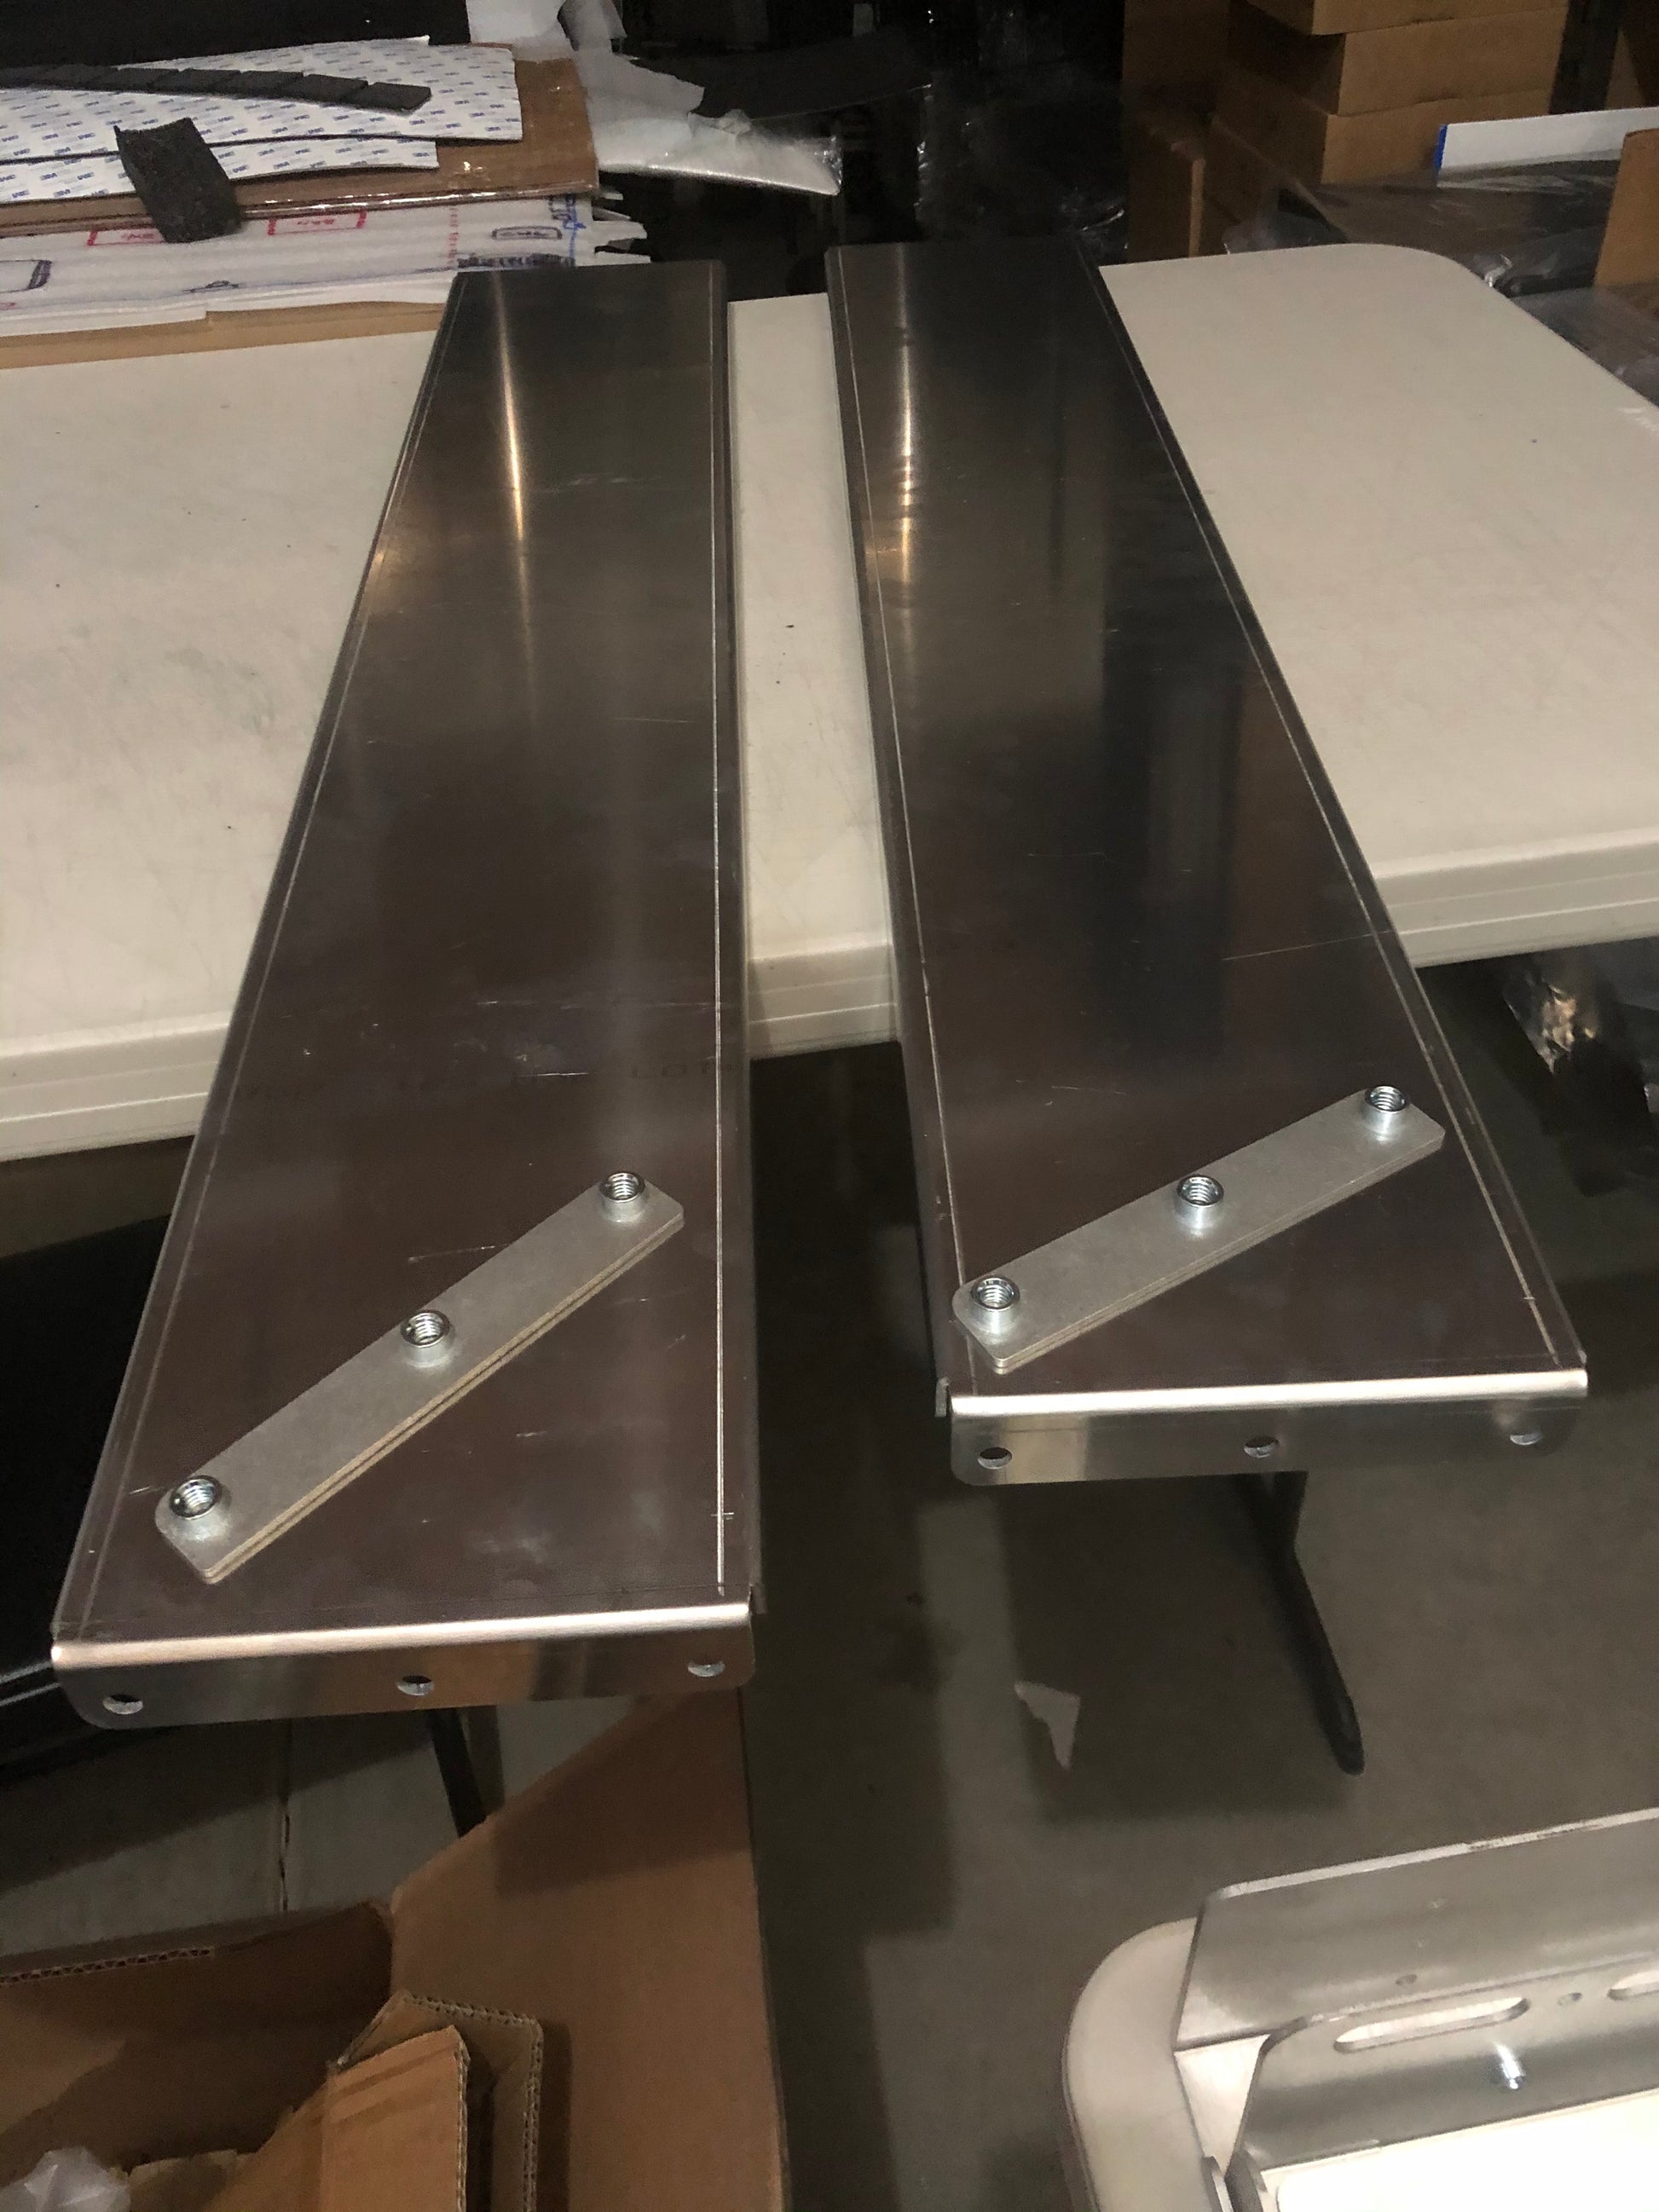 Product photo of the Rail Rack Accessory mount shelf in raw aluminum prior to painting or finishing. 